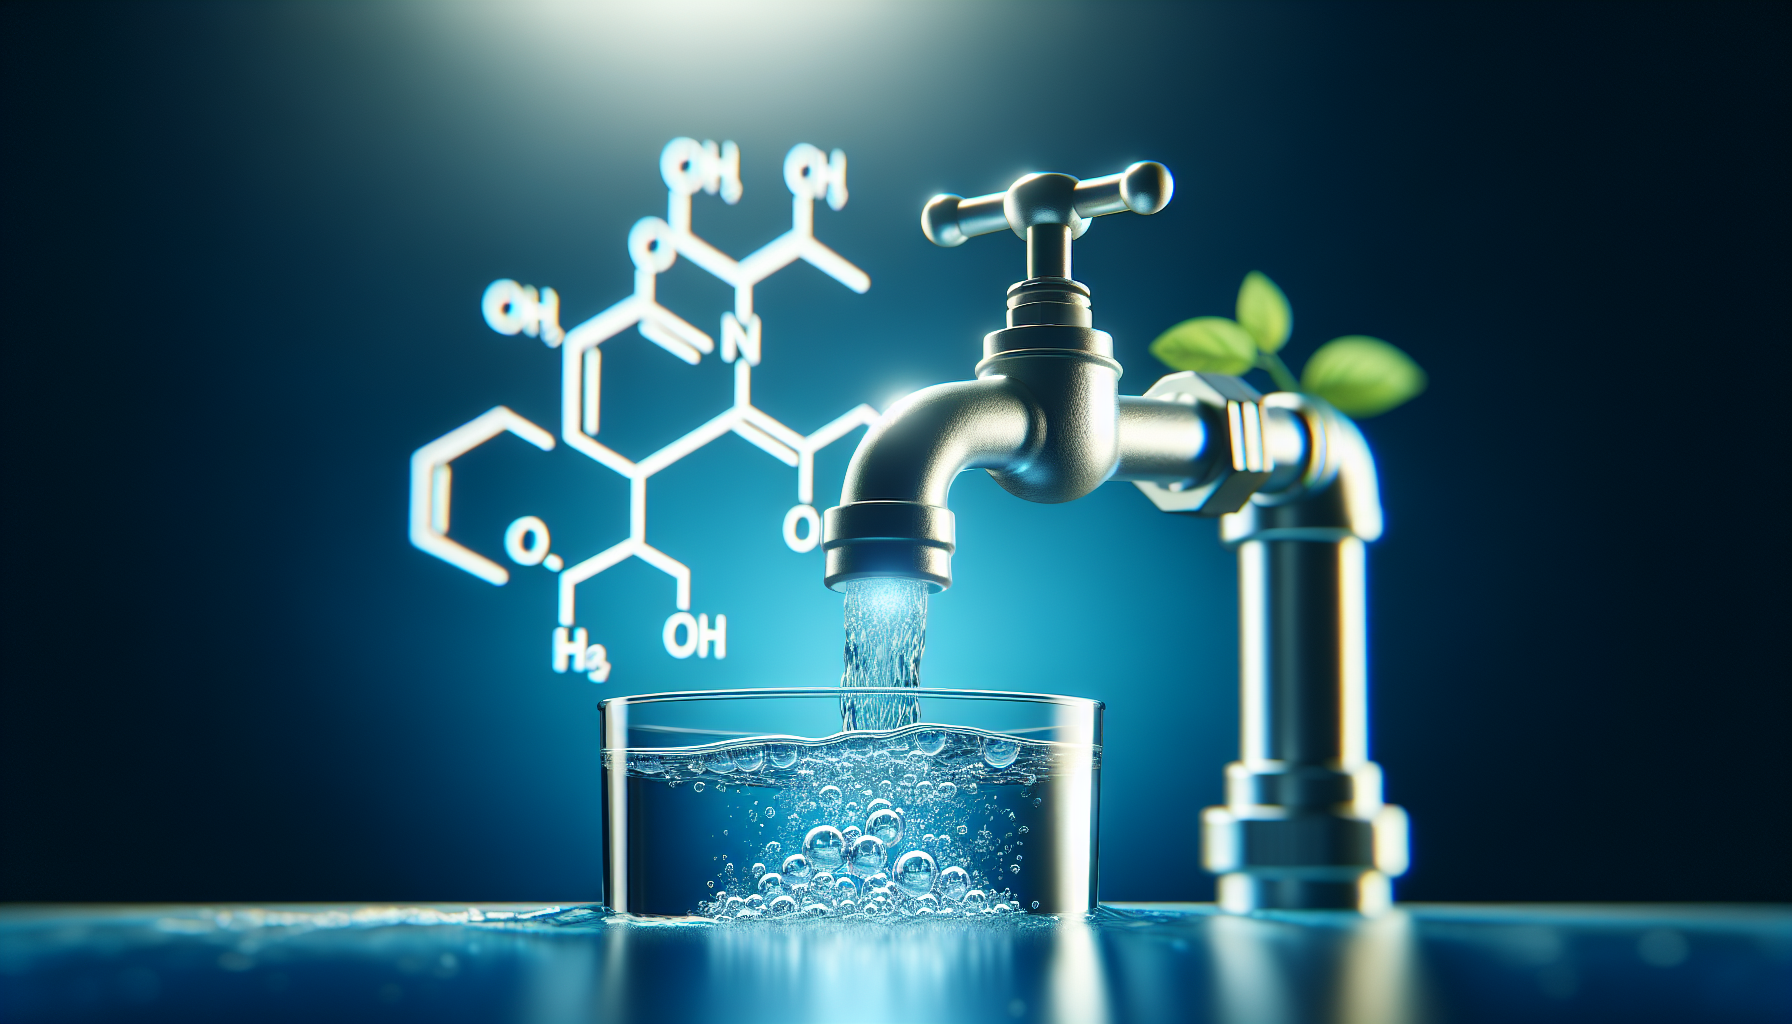 How Can I Maintain Well Water With High Levels Of Chlorate?